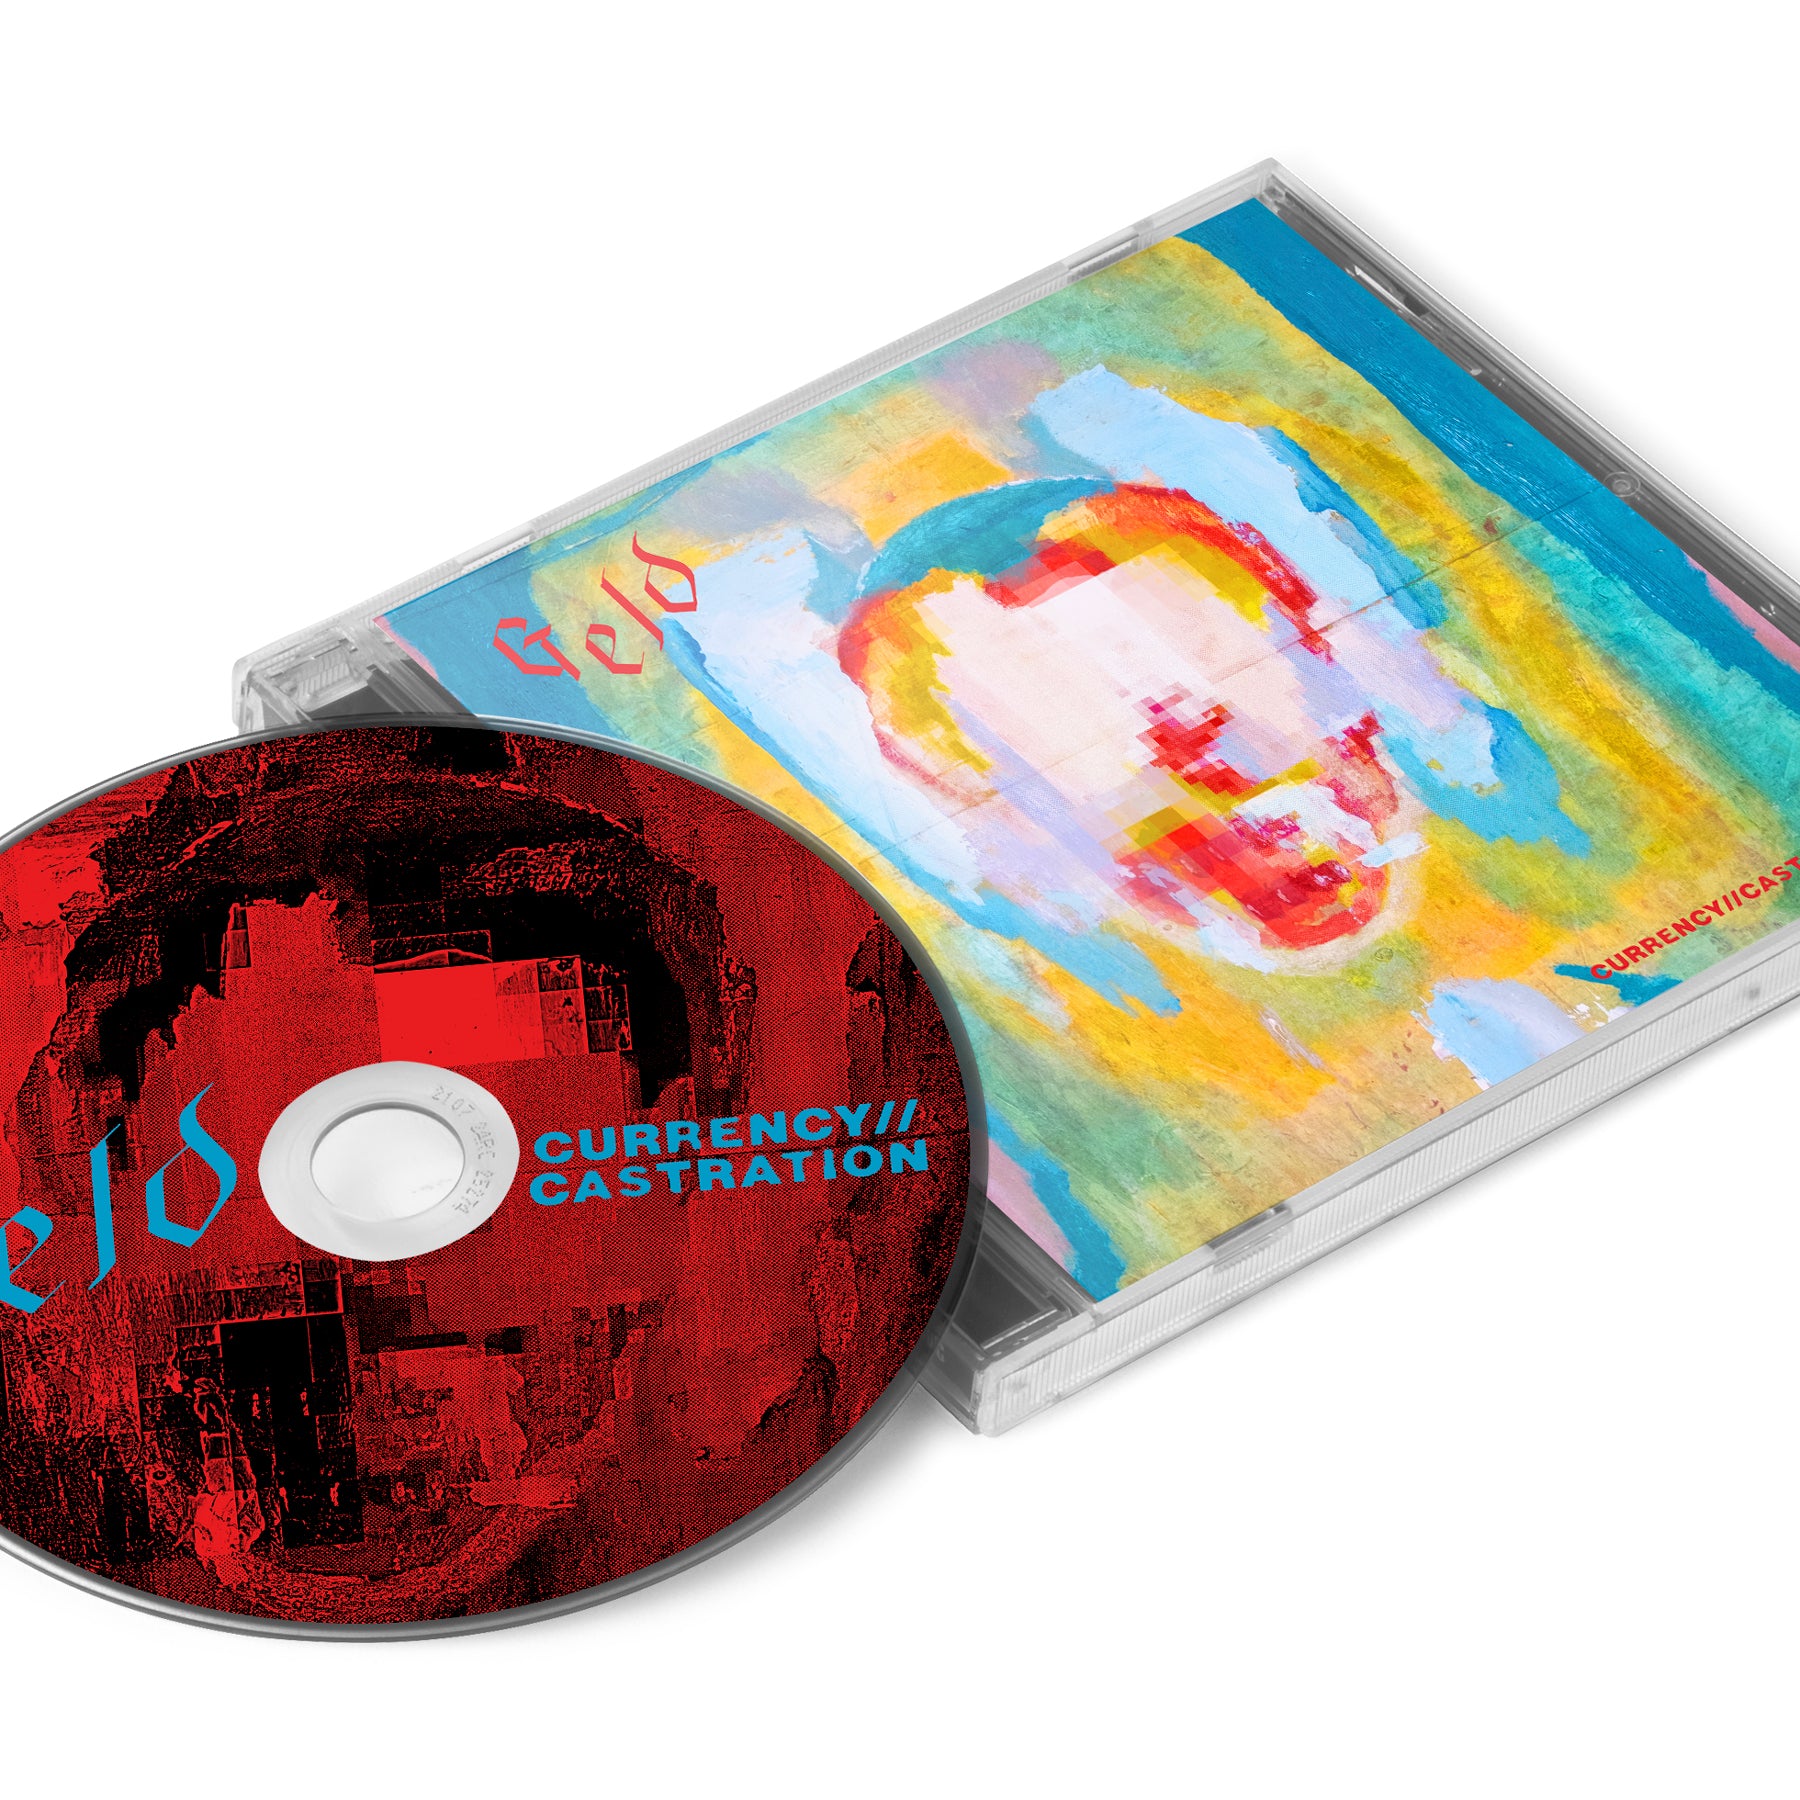 Geld "Currency // Castration" CD